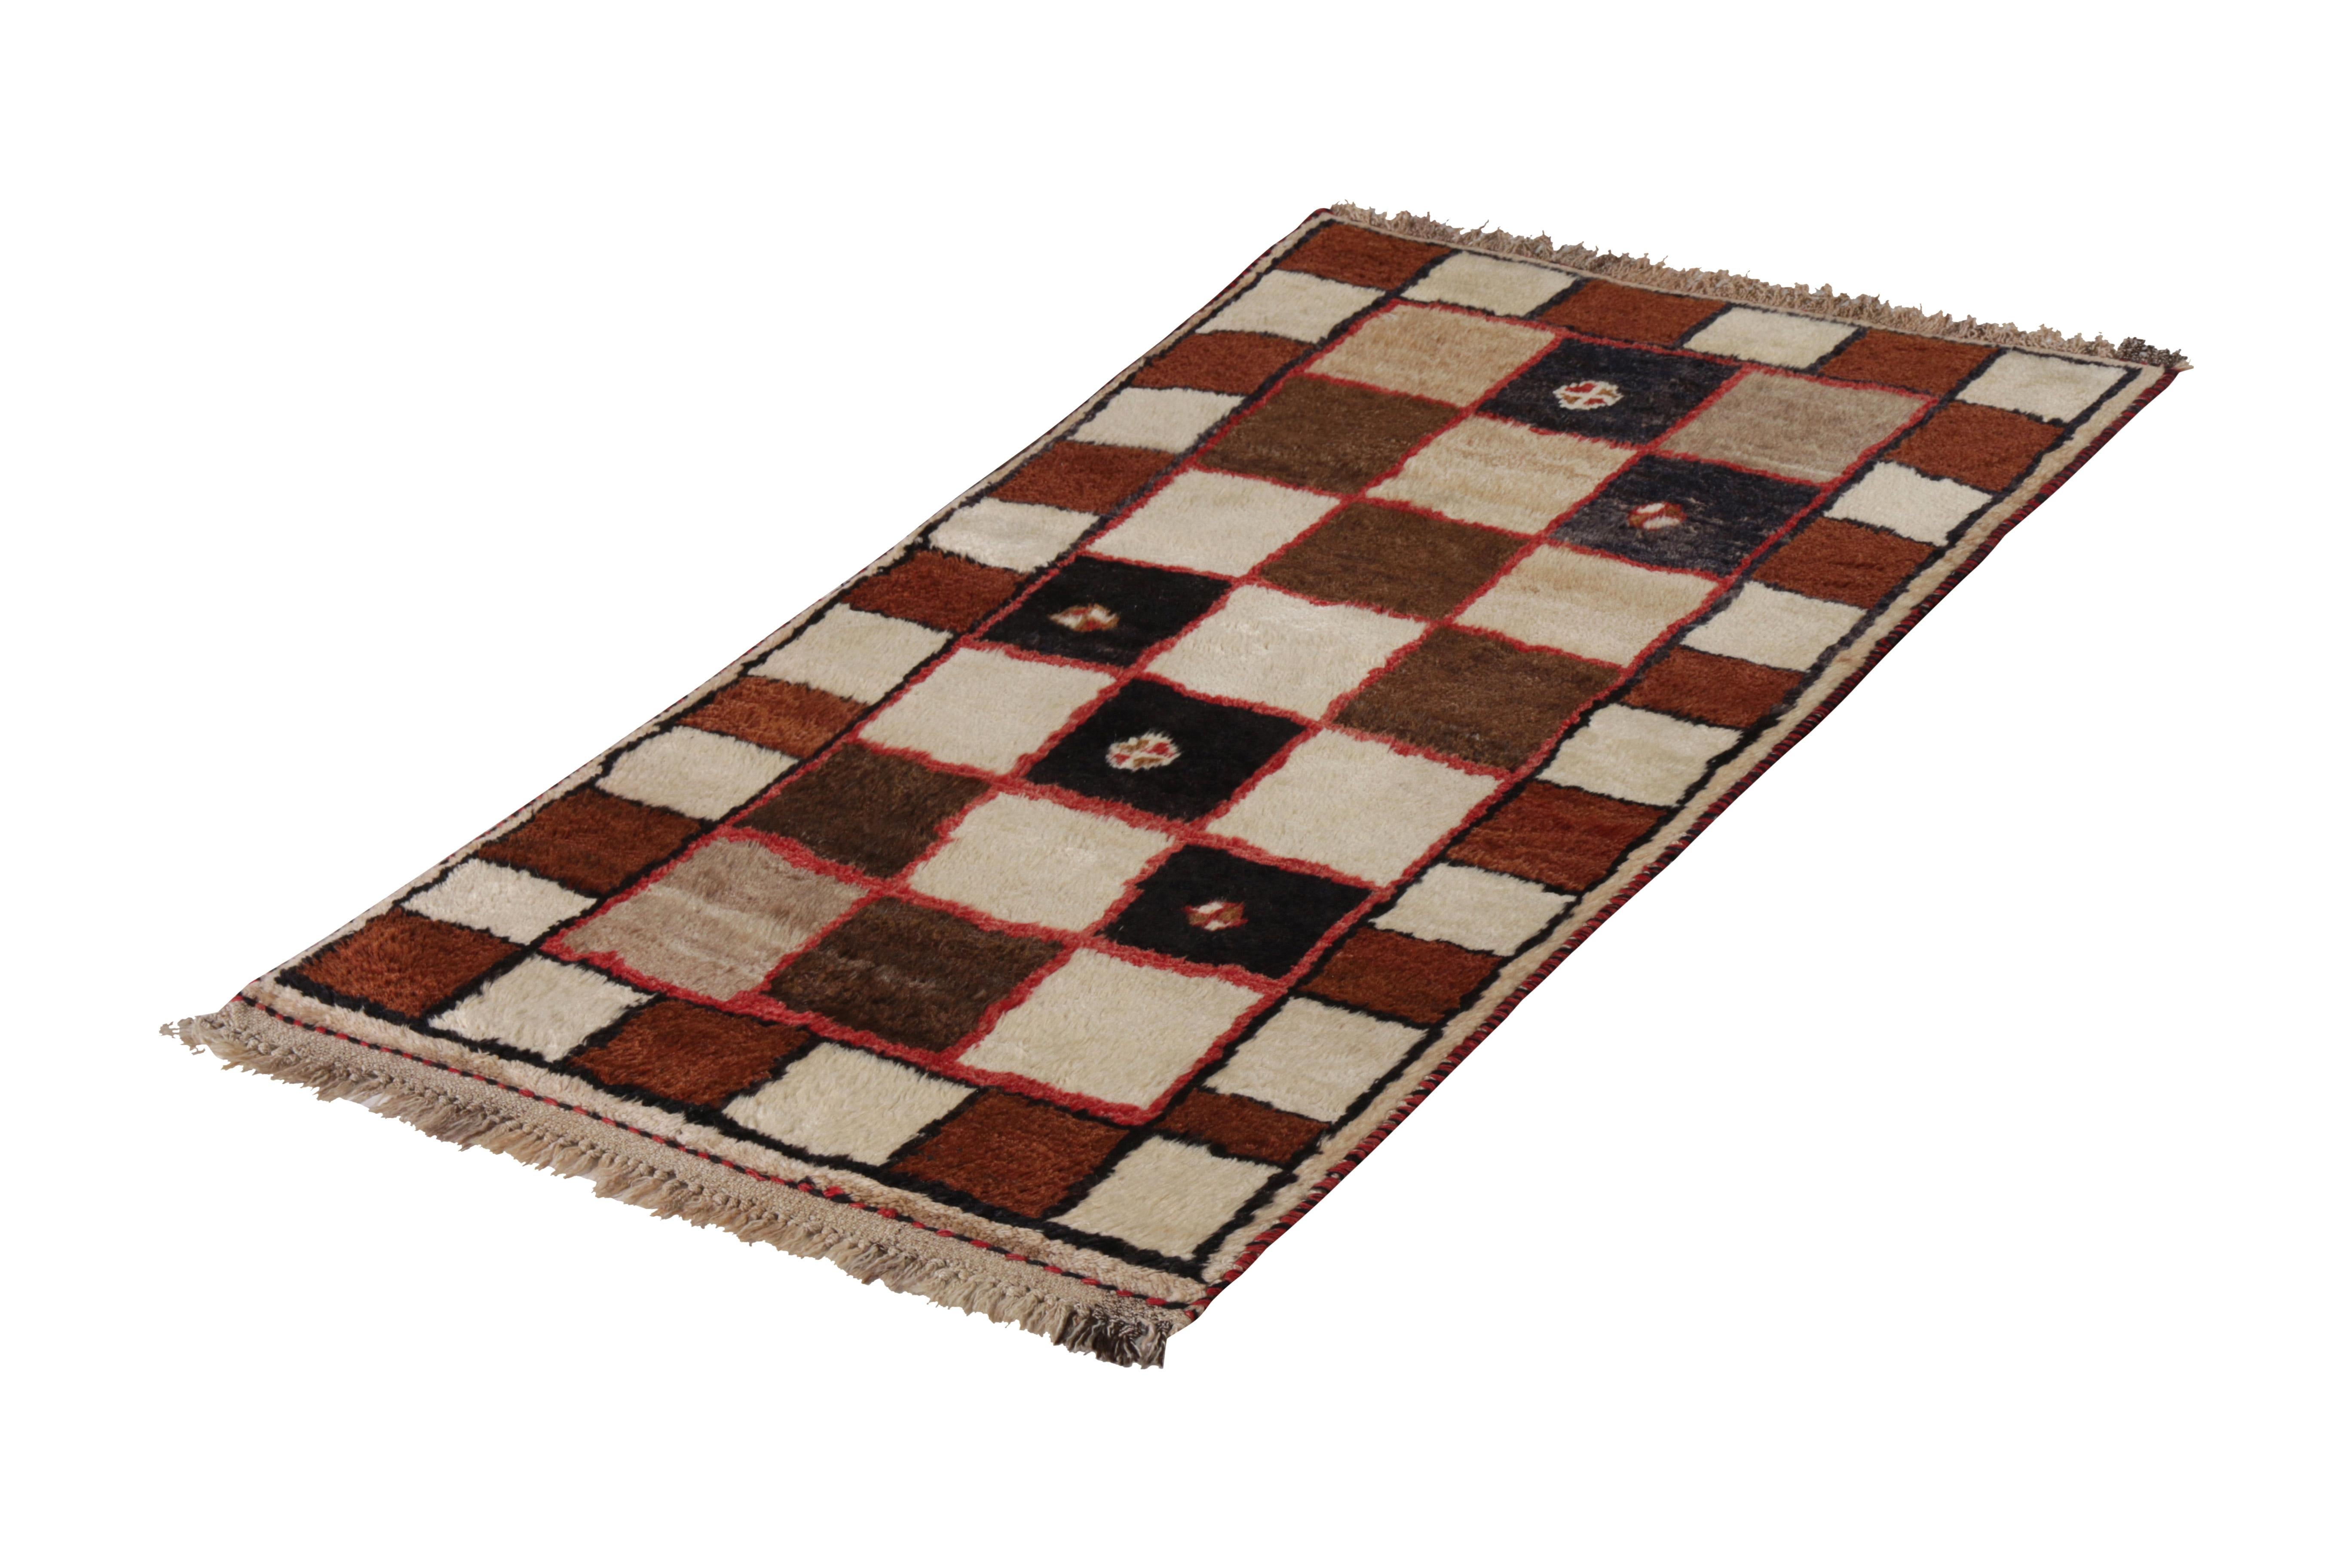 Hand knotted in wool originating circa 1950-1960, this vintage Persian rug connotes a midcentury Gabbeh rug design in excellent condition, enjoying a versatile 3 x 5 size and a comfortable beige-brown colorway in complementary geometry. A tasteful